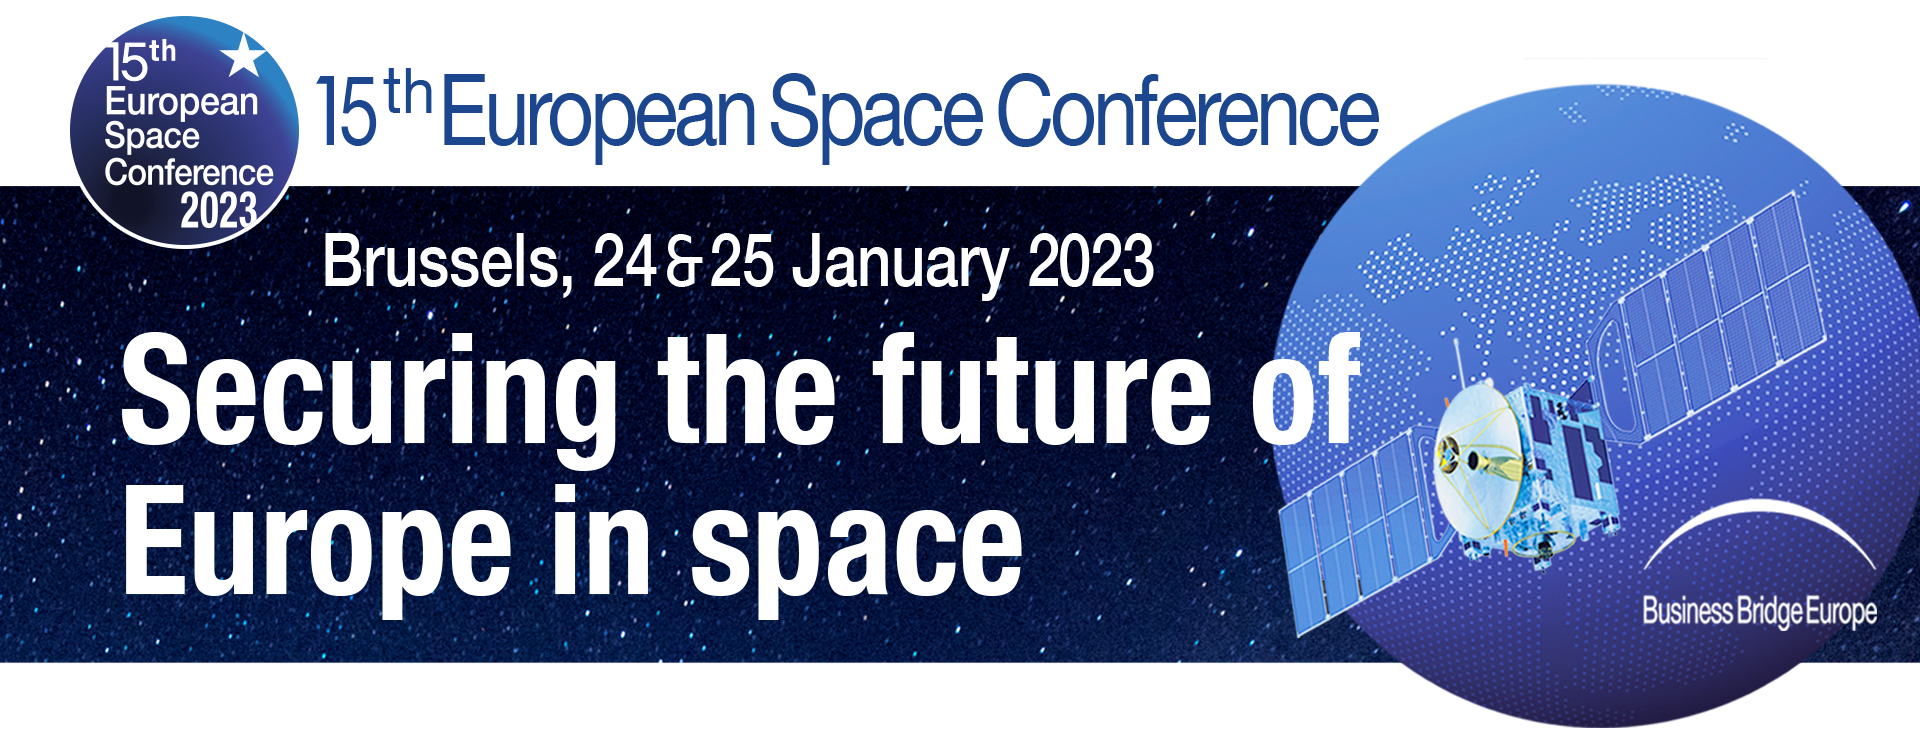 European Space Conference 2023